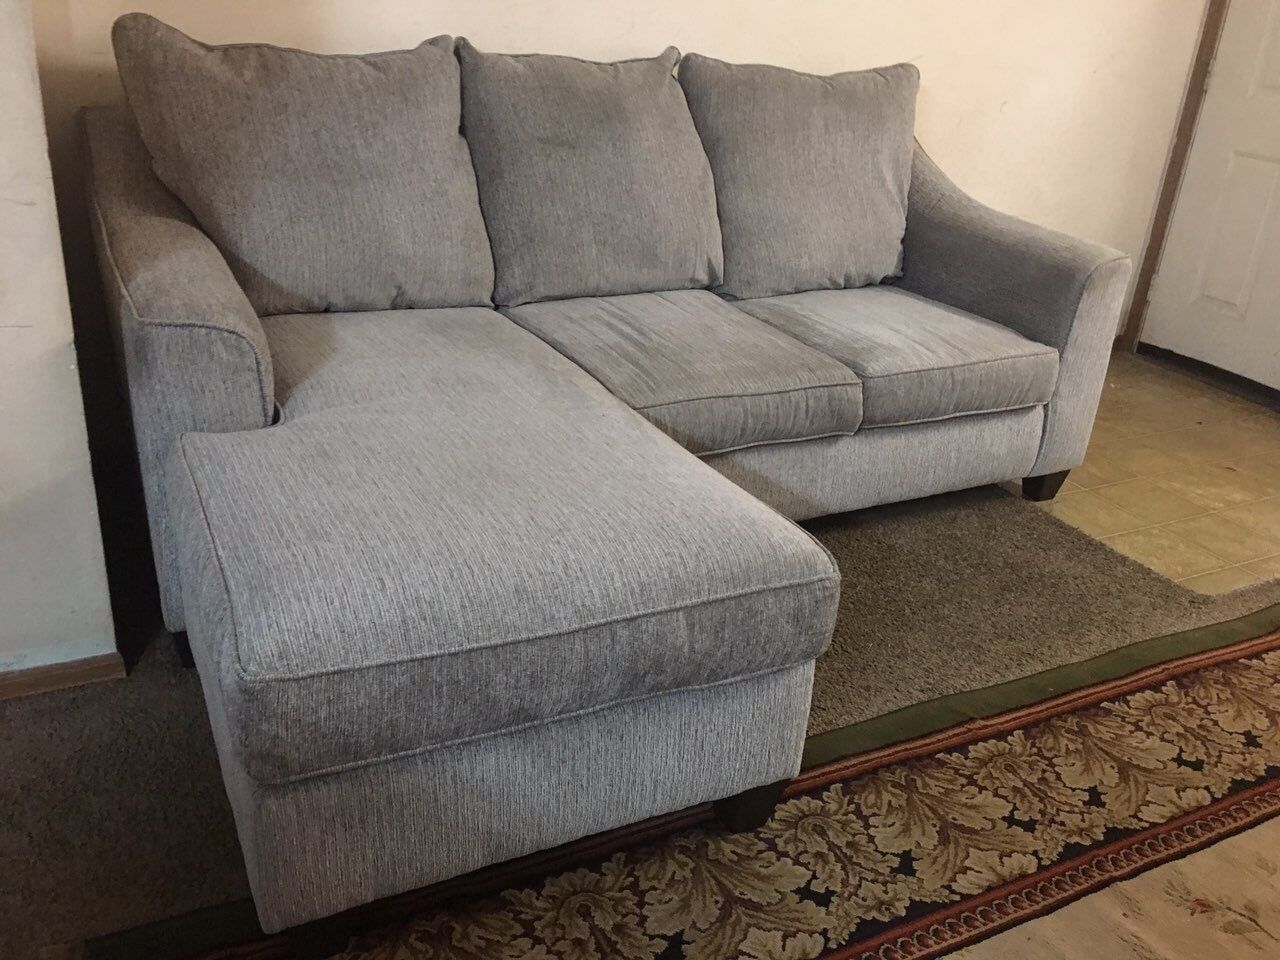 Sectional couch it’s two-piece it’s gray nothing wrong with it and overlaps no stains no pets no smoke very comfortable and very nice and beautiful a